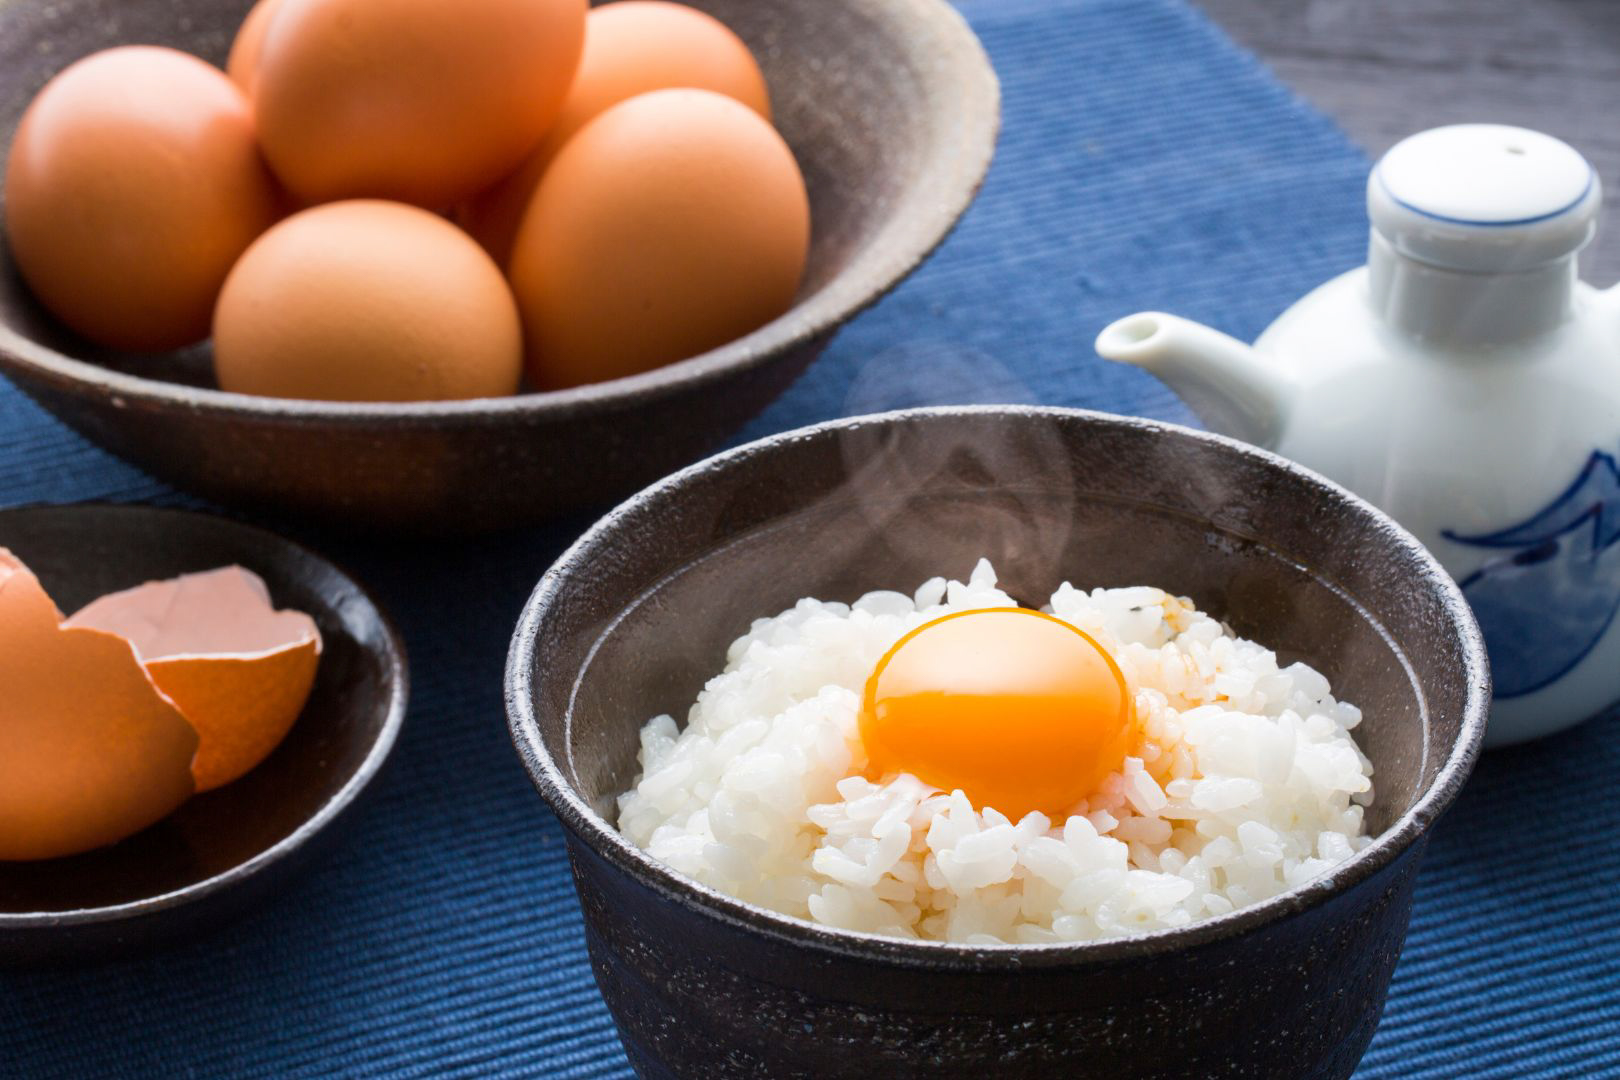 A dark ceramic bowl of Tamago Kake Gohan on a blue tablecloth. A perfectly intact raw egg yolk sits on top of the white rice. Soy sauce can't be seen in the dish, although there is a white ceramic soy sauce dispenser to the right. Behind the TKG is a large bowl of uncracked eggs and to the left we can see a small bowl with the egg shell from the egg that's already in the dish.